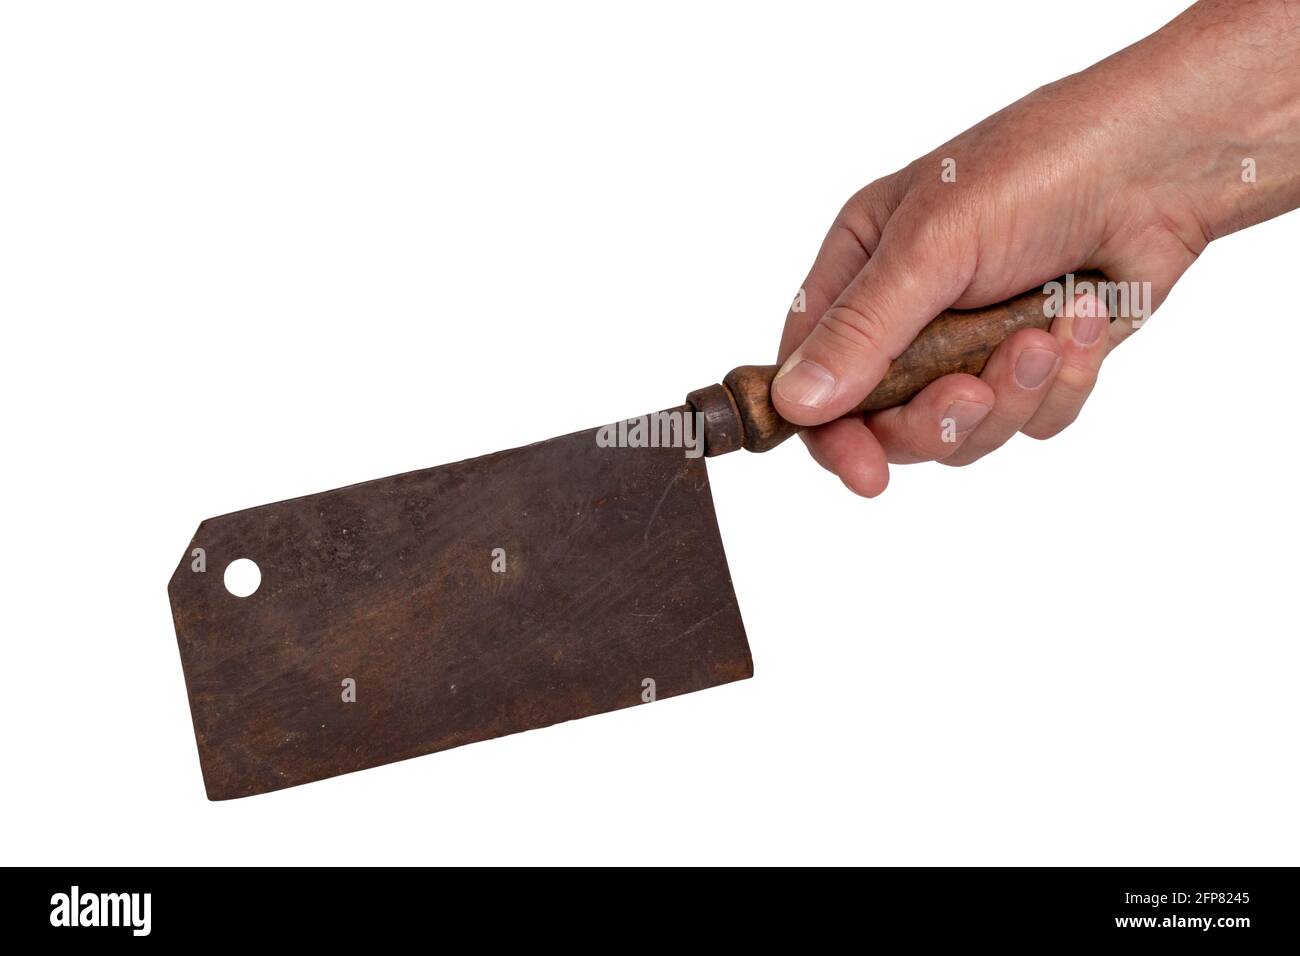 https://c8.alamy.com/comp/2FP8245/hand-holding-a-rusty-old-butcher-cleaver-with-wooden-handle-isolated-on-a-white-background-vintage-butcher-or-kitchen-knife-with-clipping-path-2FP8245.jpg